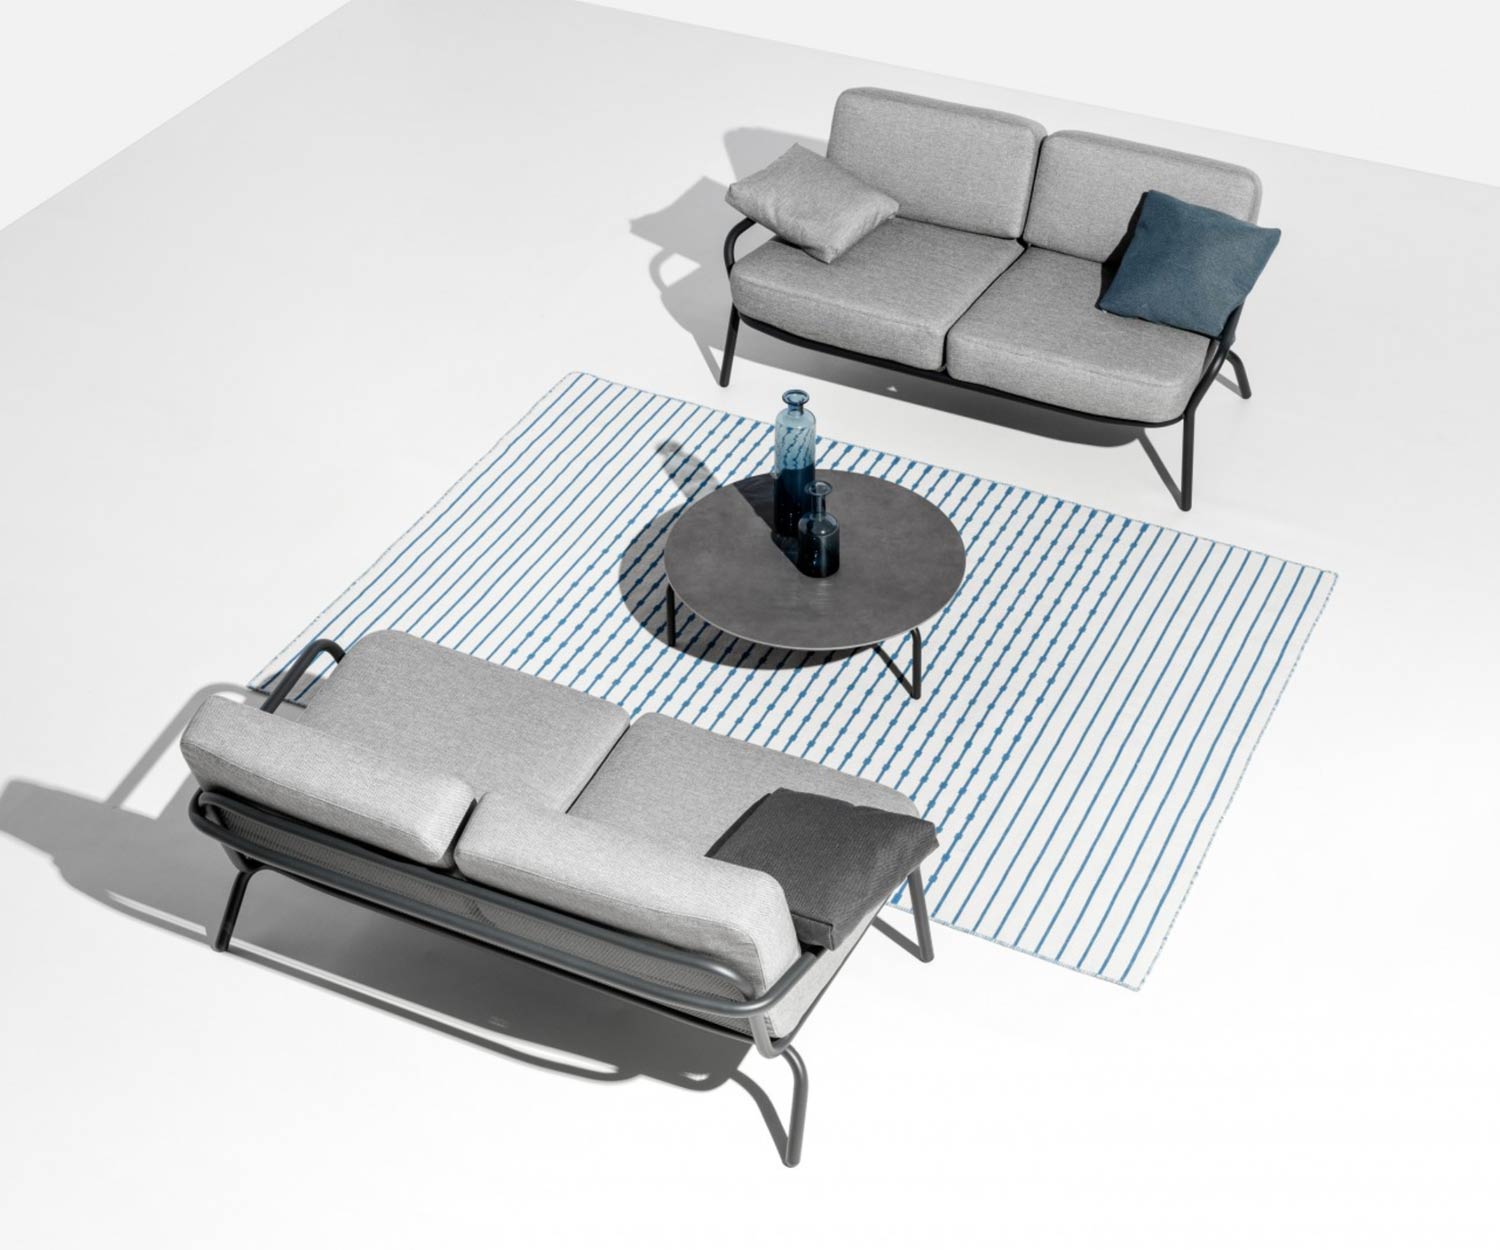 Two Todus Starling Design lounge sofas facing each other with coffee table